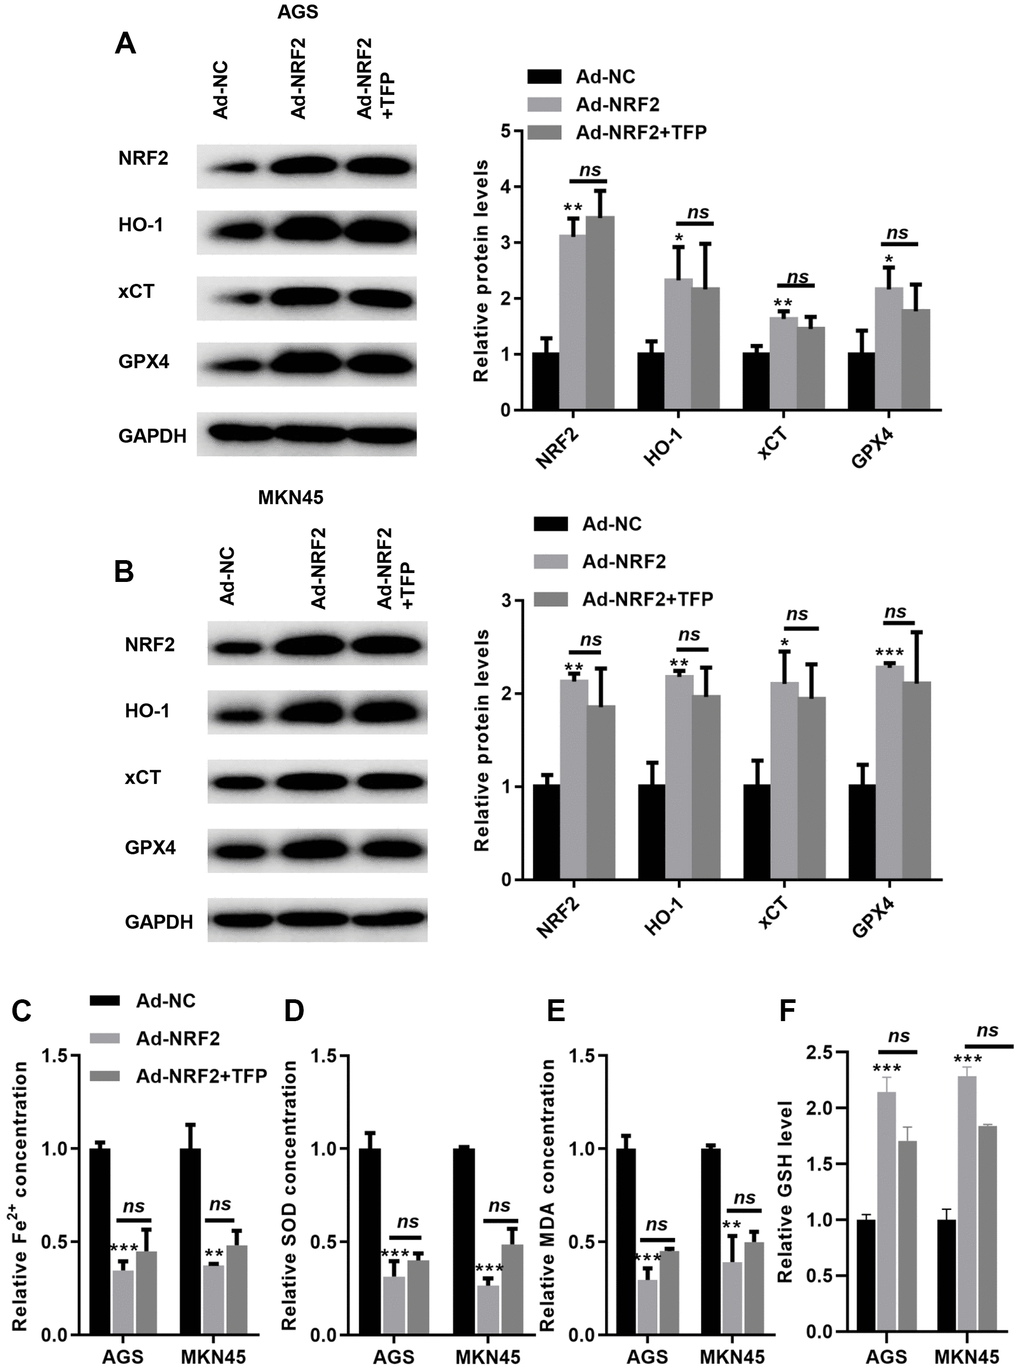 TFP-induced ferroptosis was mediated via NRF2 in gastric cancer cells. EBV-infected AGS and MKN45 cells were preincubated with TFP for 2 h. After that, Ad-NRF2 and Ad-NC were transfected into EBV-infected AGS and MKN45 cells for 24 h. Transfection with ad-NRF2 abolished TFP-induced suppression of HO-1, GPX4 and xCT in AGS (A) and MKN45 (B) cells. Overexpression of NRF2 reduced intracellular Fe2+ (C), SOD (D) and MDA (E) levels, even in the presence of TFP, in EBV-infected AGS and MKN45 cells. (F) Elevated NRF2 expression increased the level of GSH, and TFP pretreatment could not affect such effects in EBV-transfected GC cells. *p